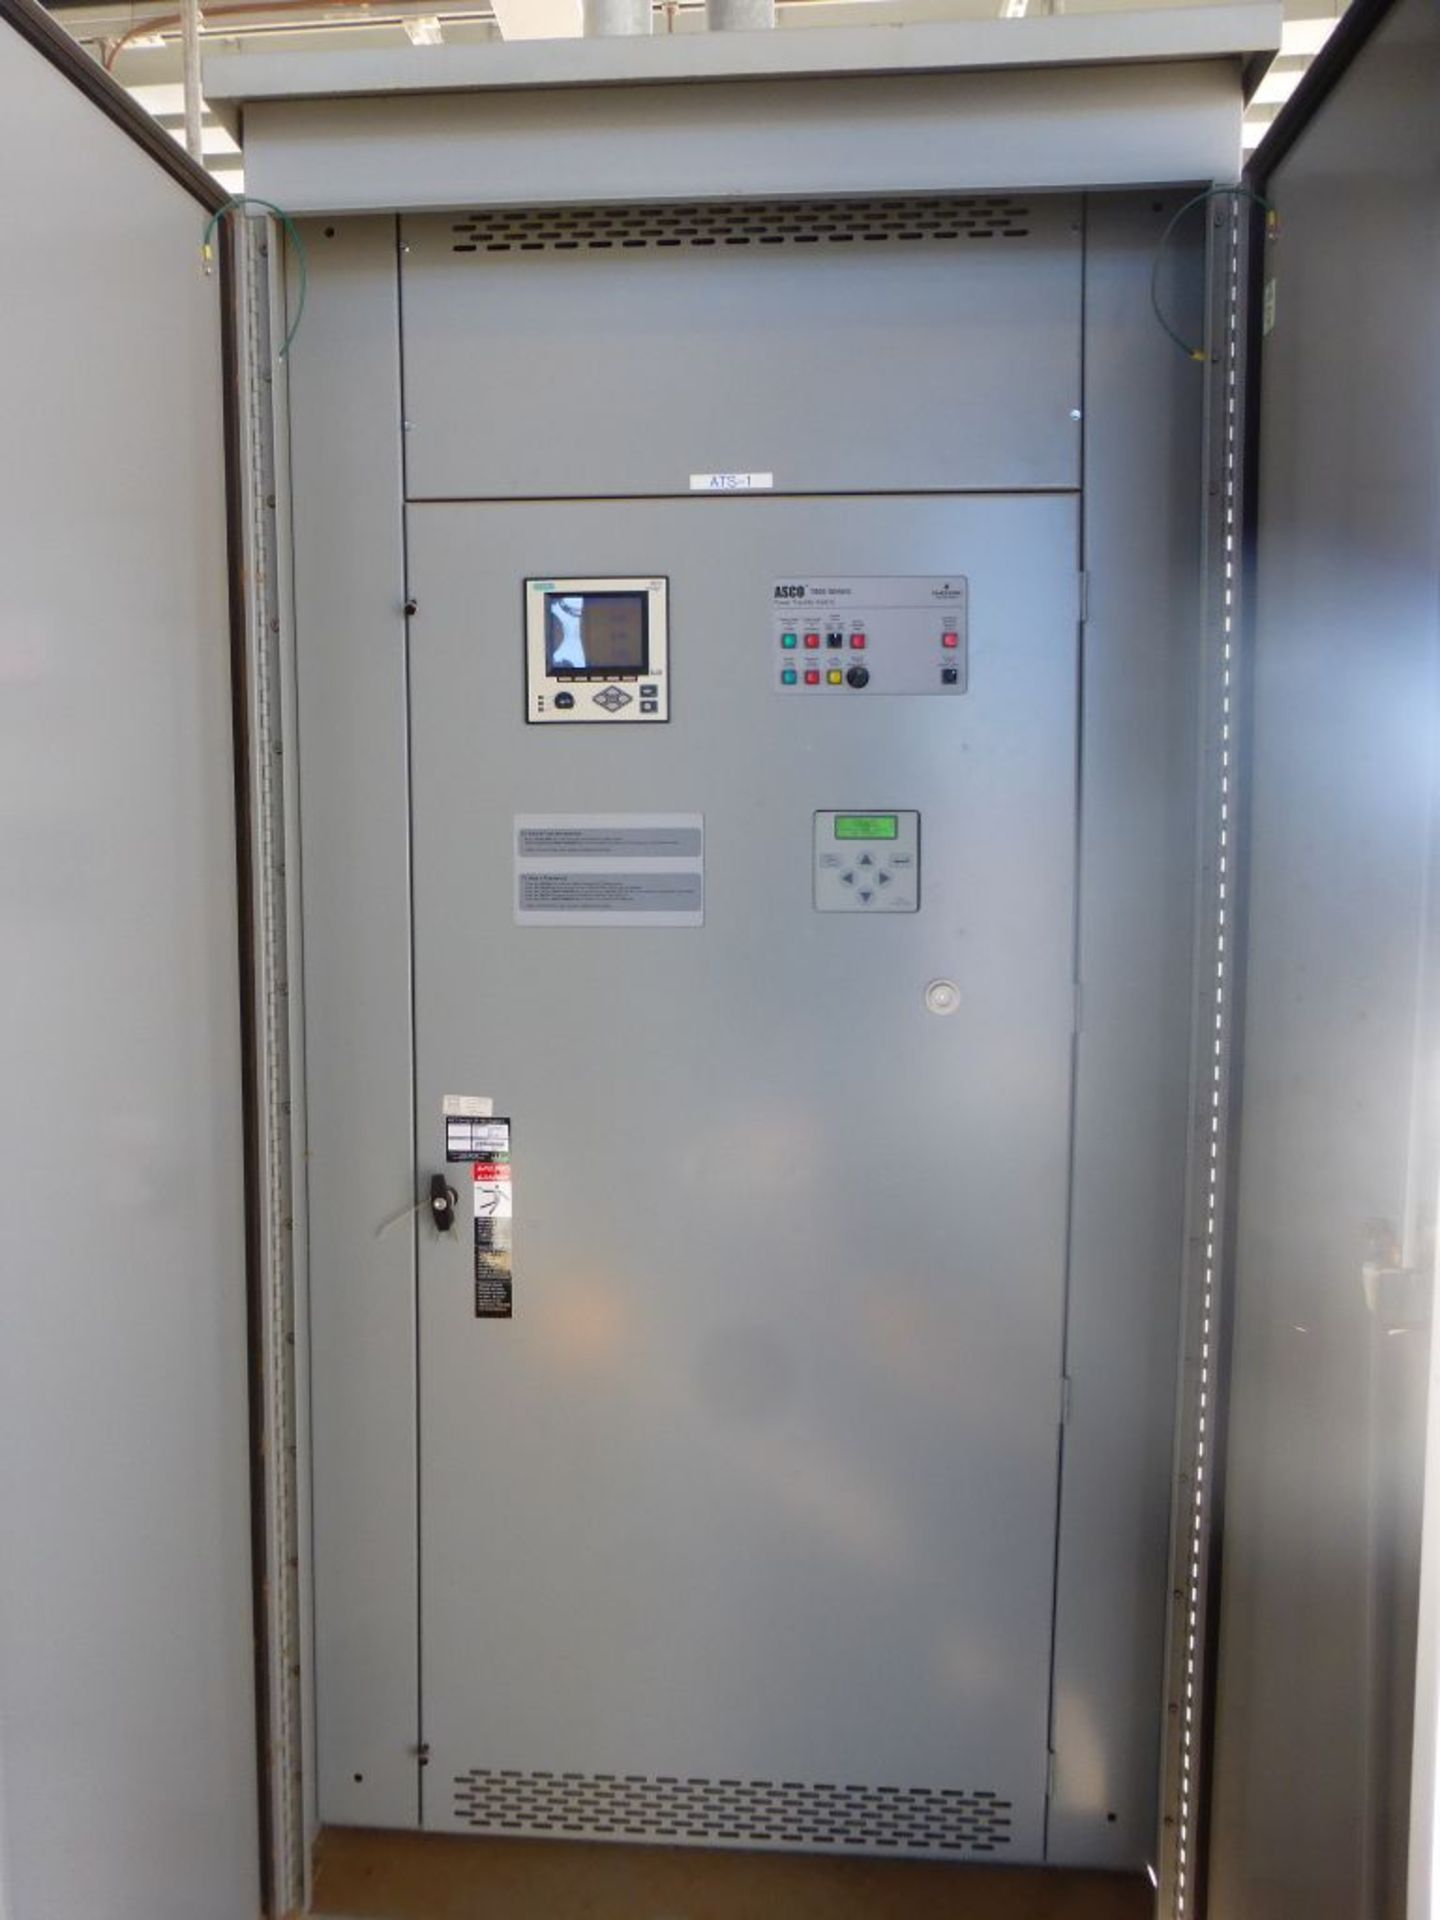 ASCO 7000 Series Power Transfer Switch | Lot Loading Fee: $50 | 800A; 480V; Tag: 233657 - Image 4 of 12